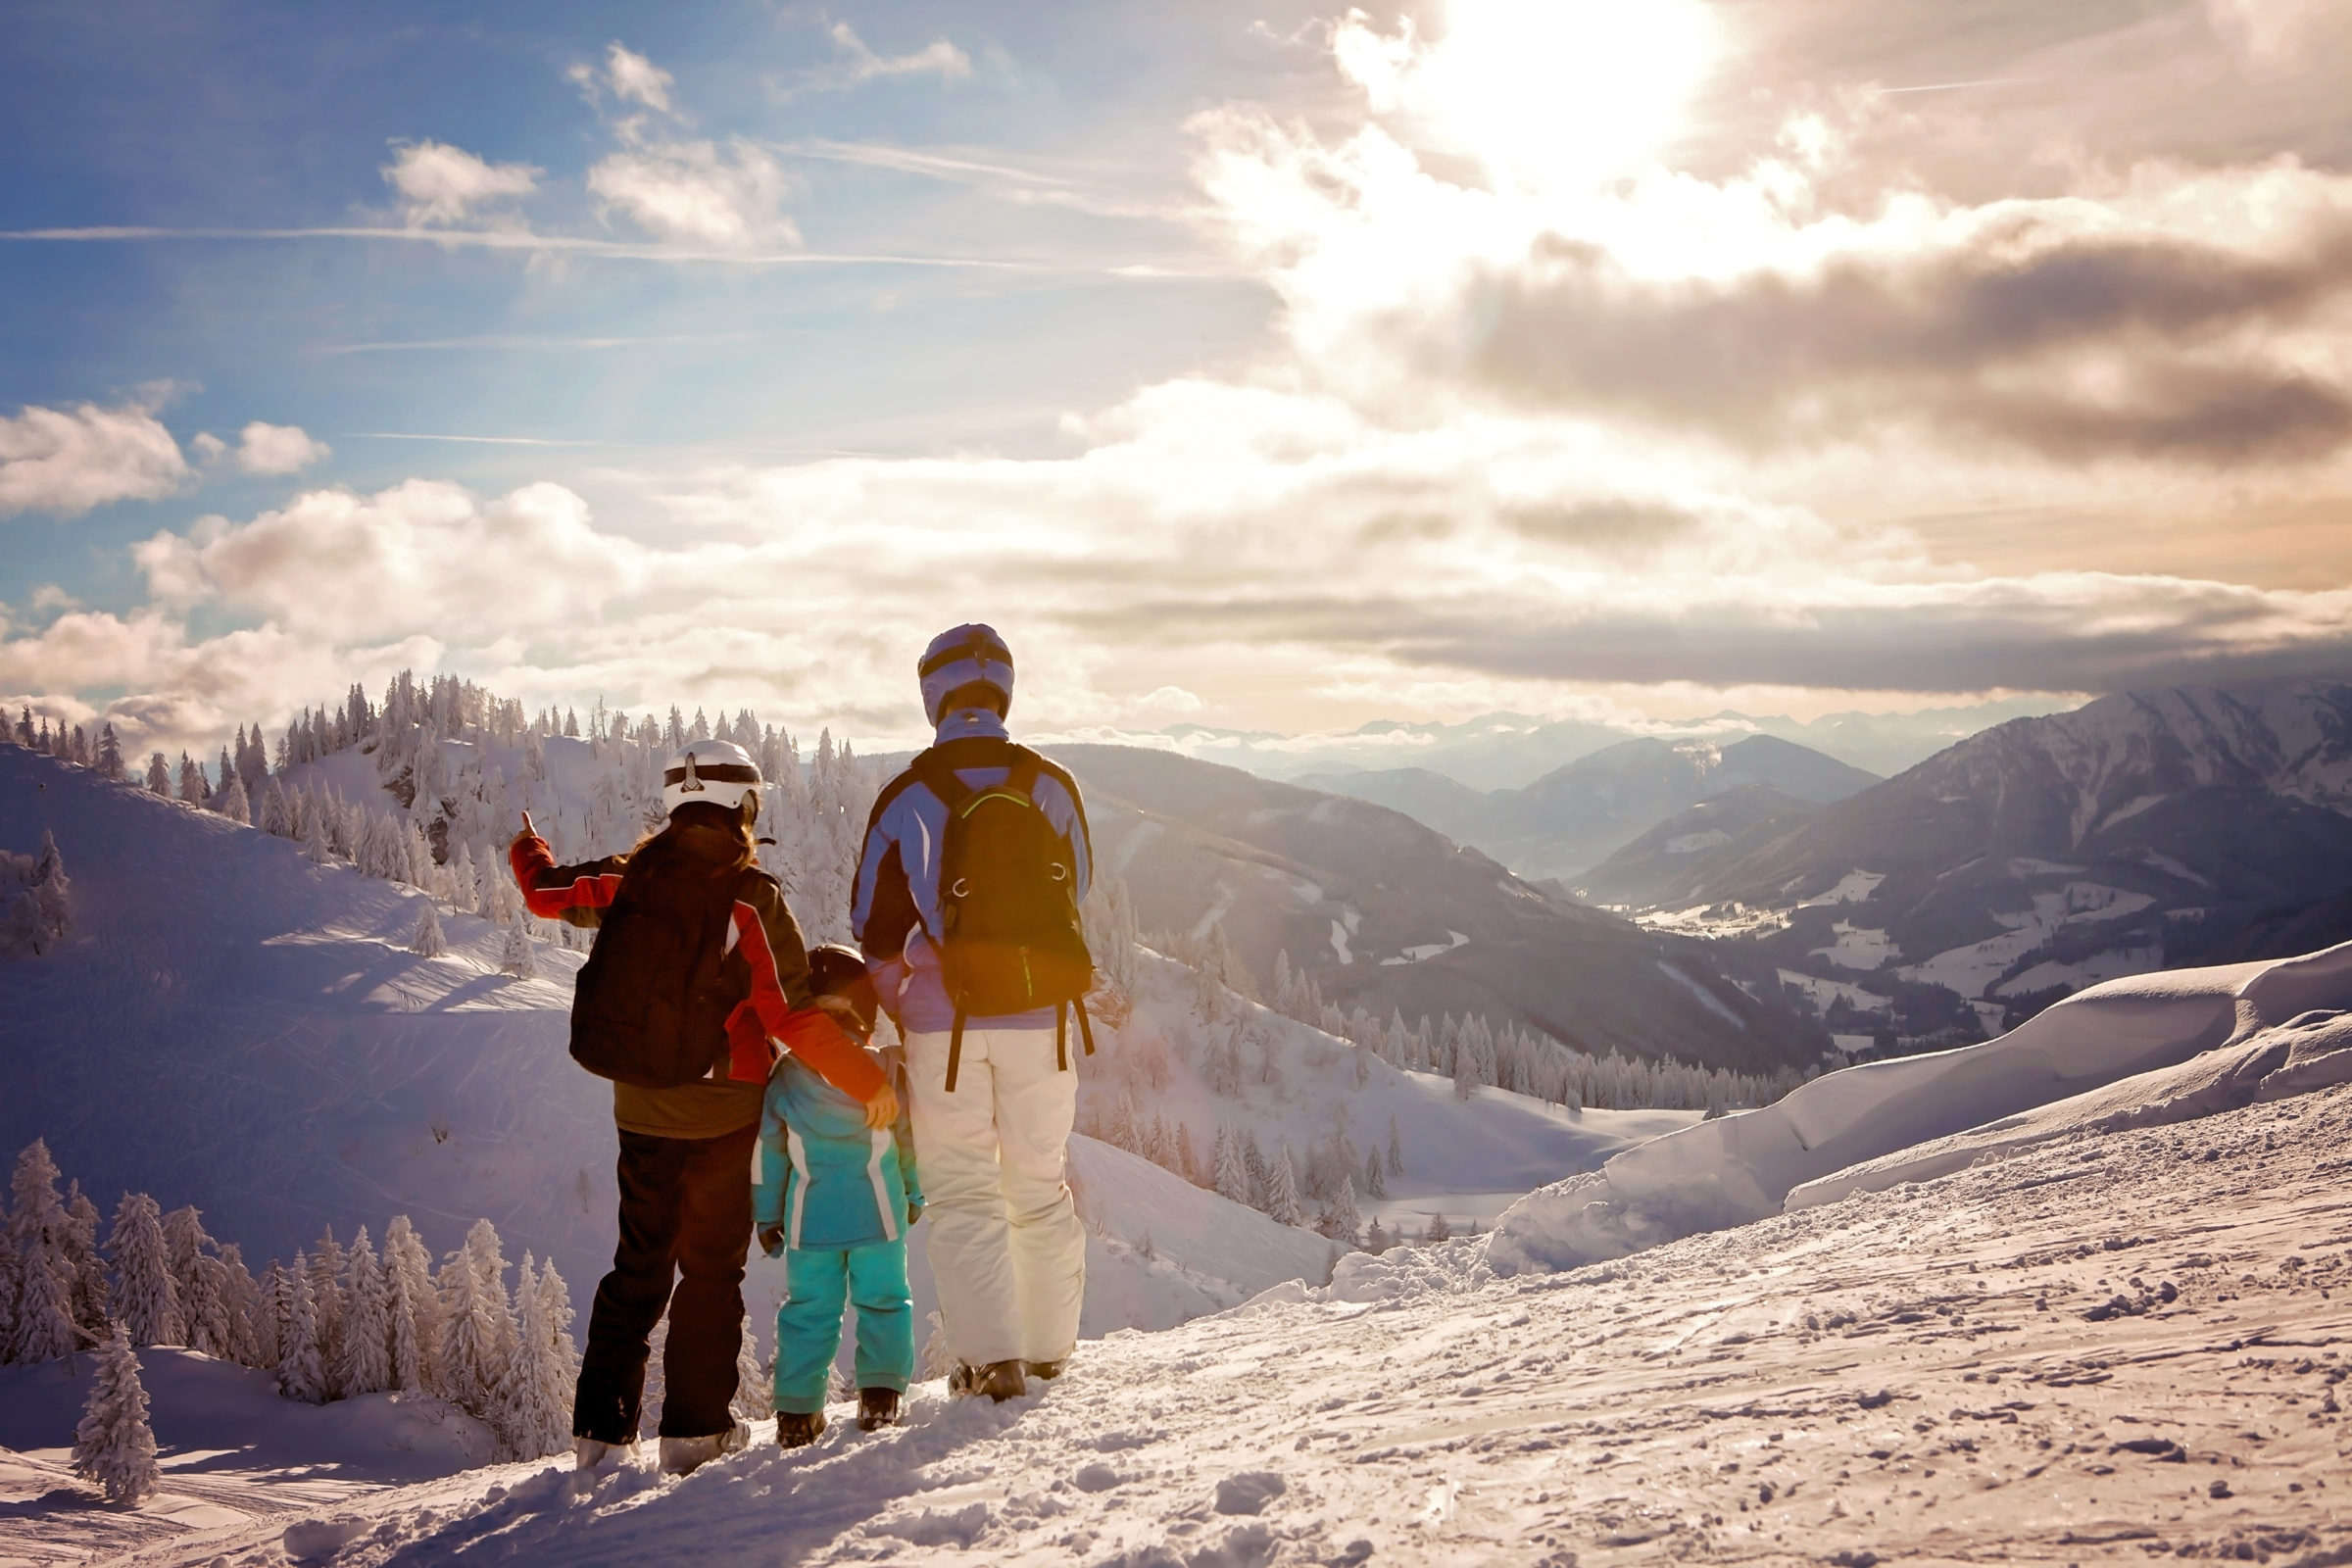 Skiing & Snowboarding Safety: Learn the Risks & Plan for Emergencies